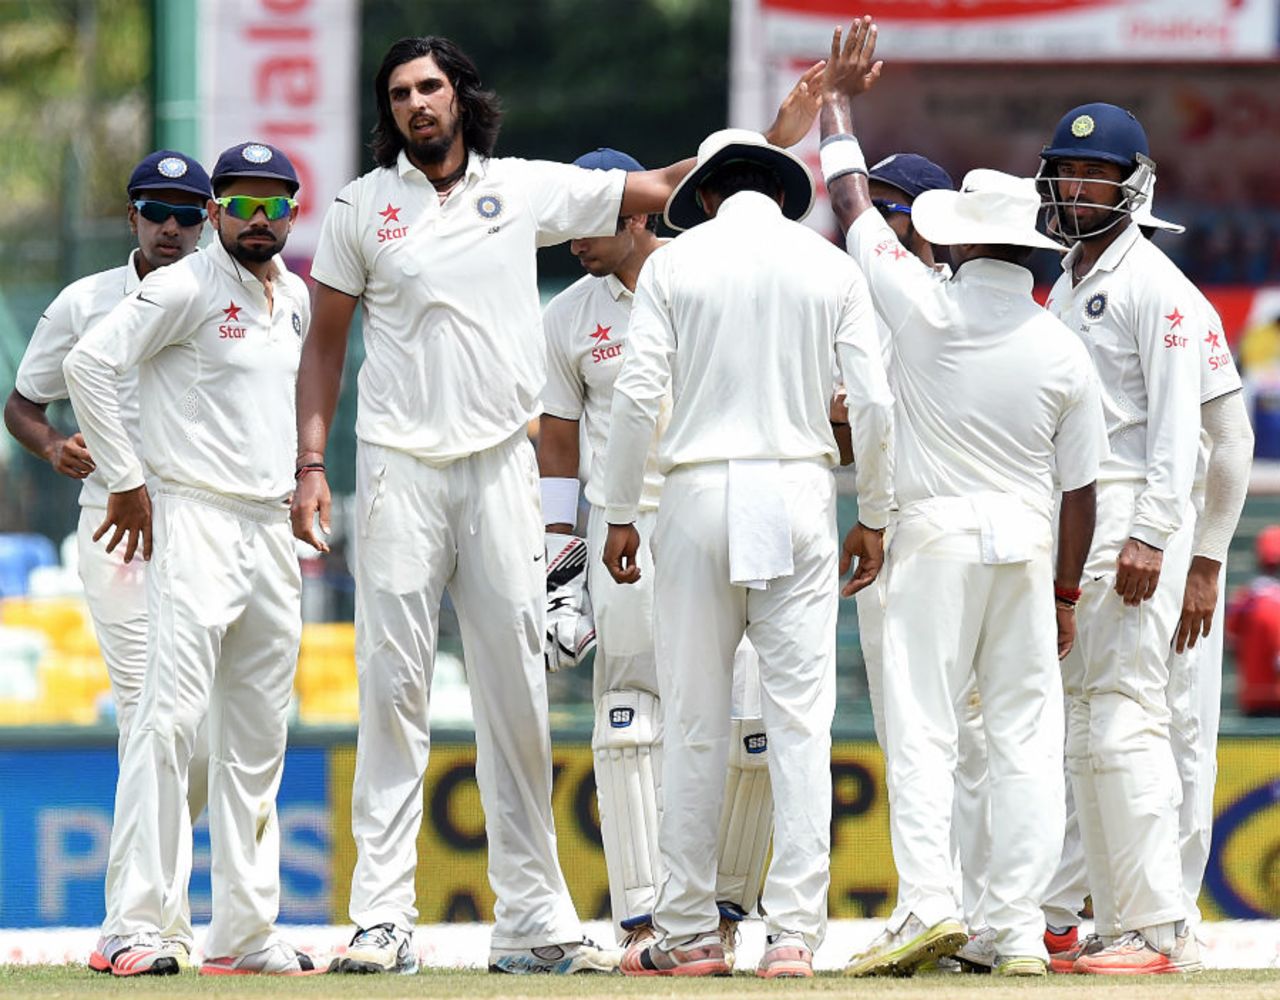 A relieved Ishant Sharma after dismissing Upul Tharanga, Sri Lanka v India, 3rd Test, SSC, Colombo, 3rd day, August 30, 2015